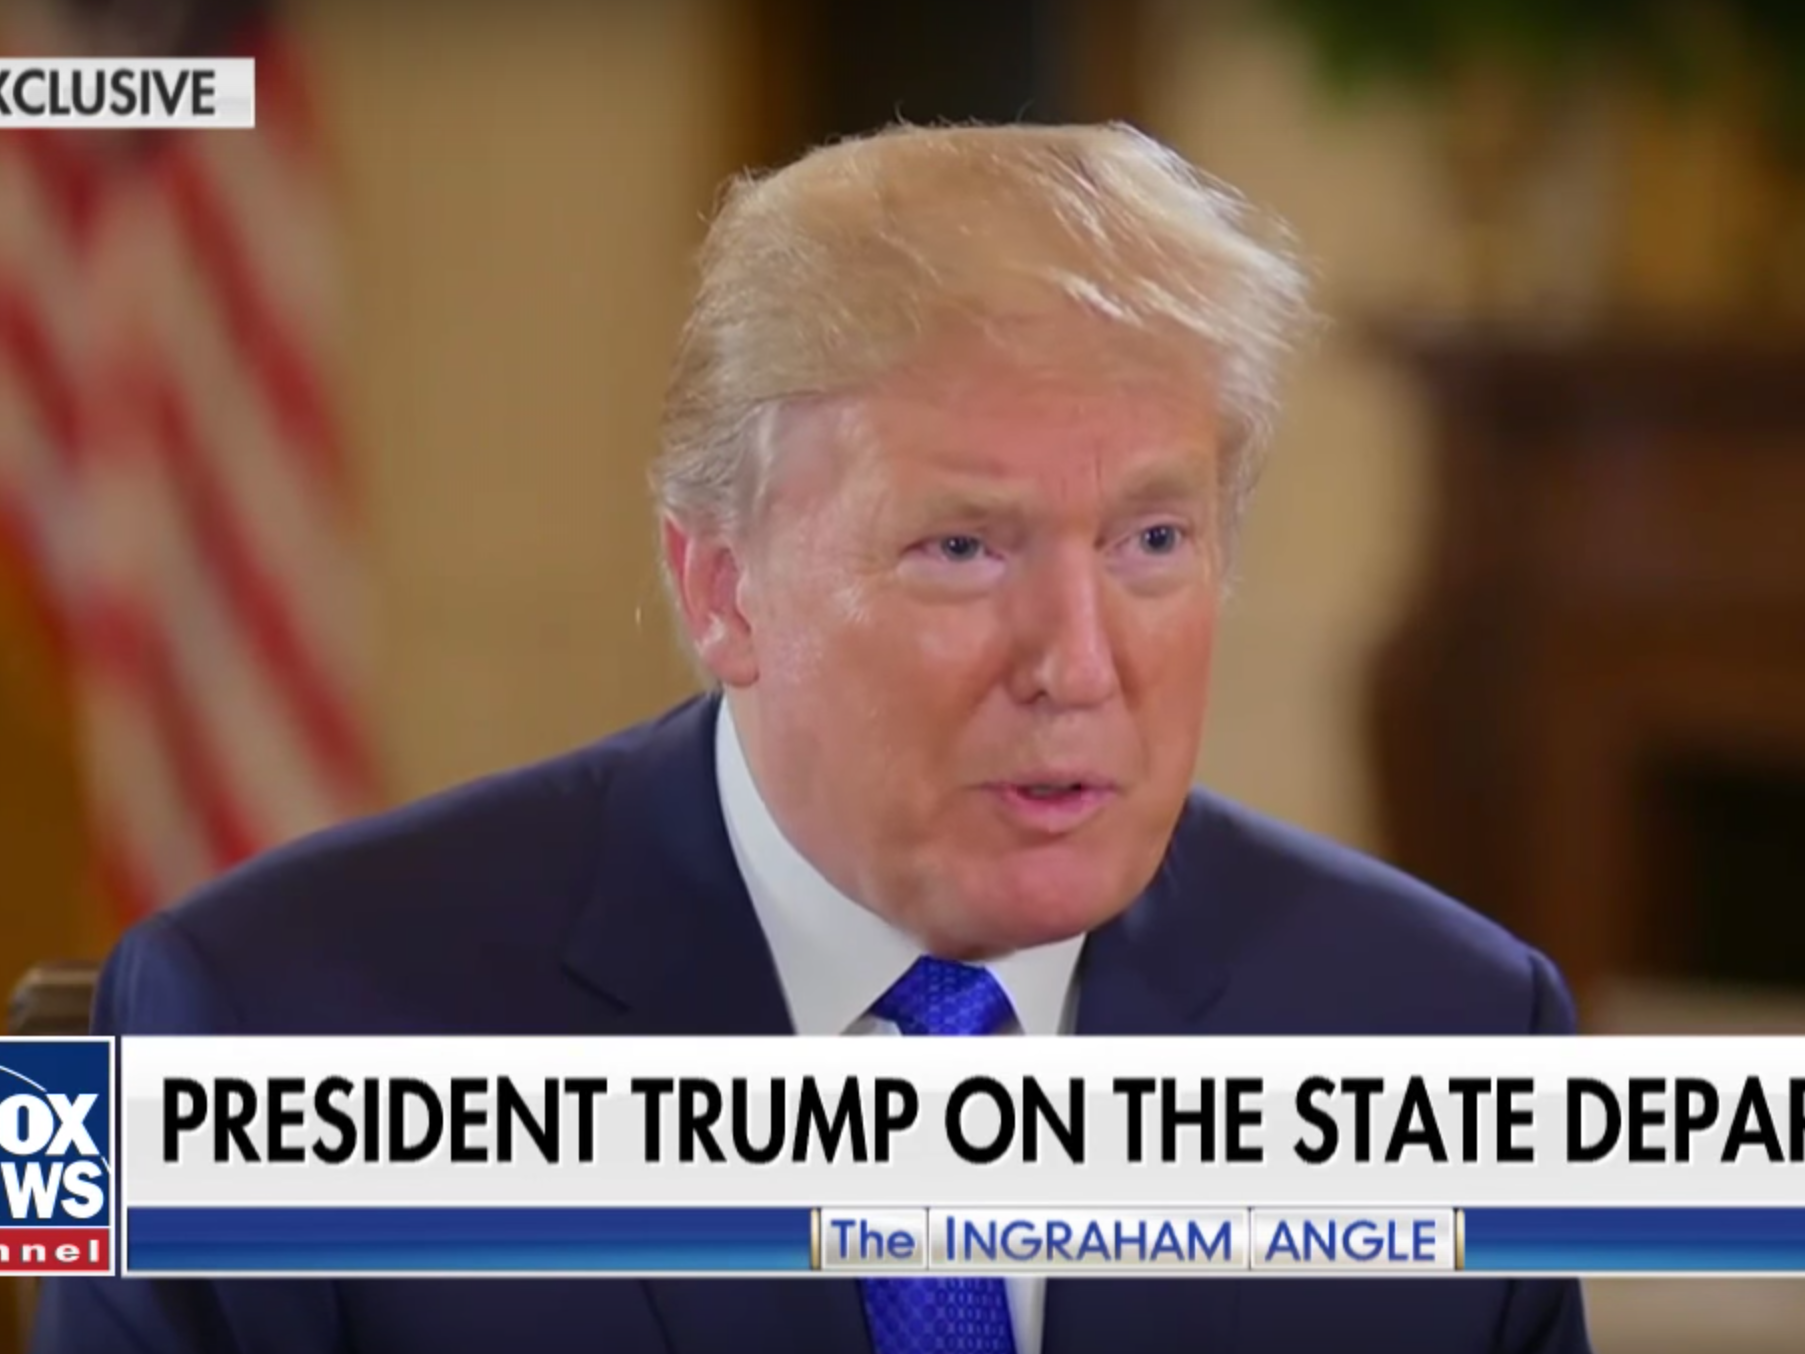 Donald Trump speaks with Fox News' Laura Ingraham about his State Department